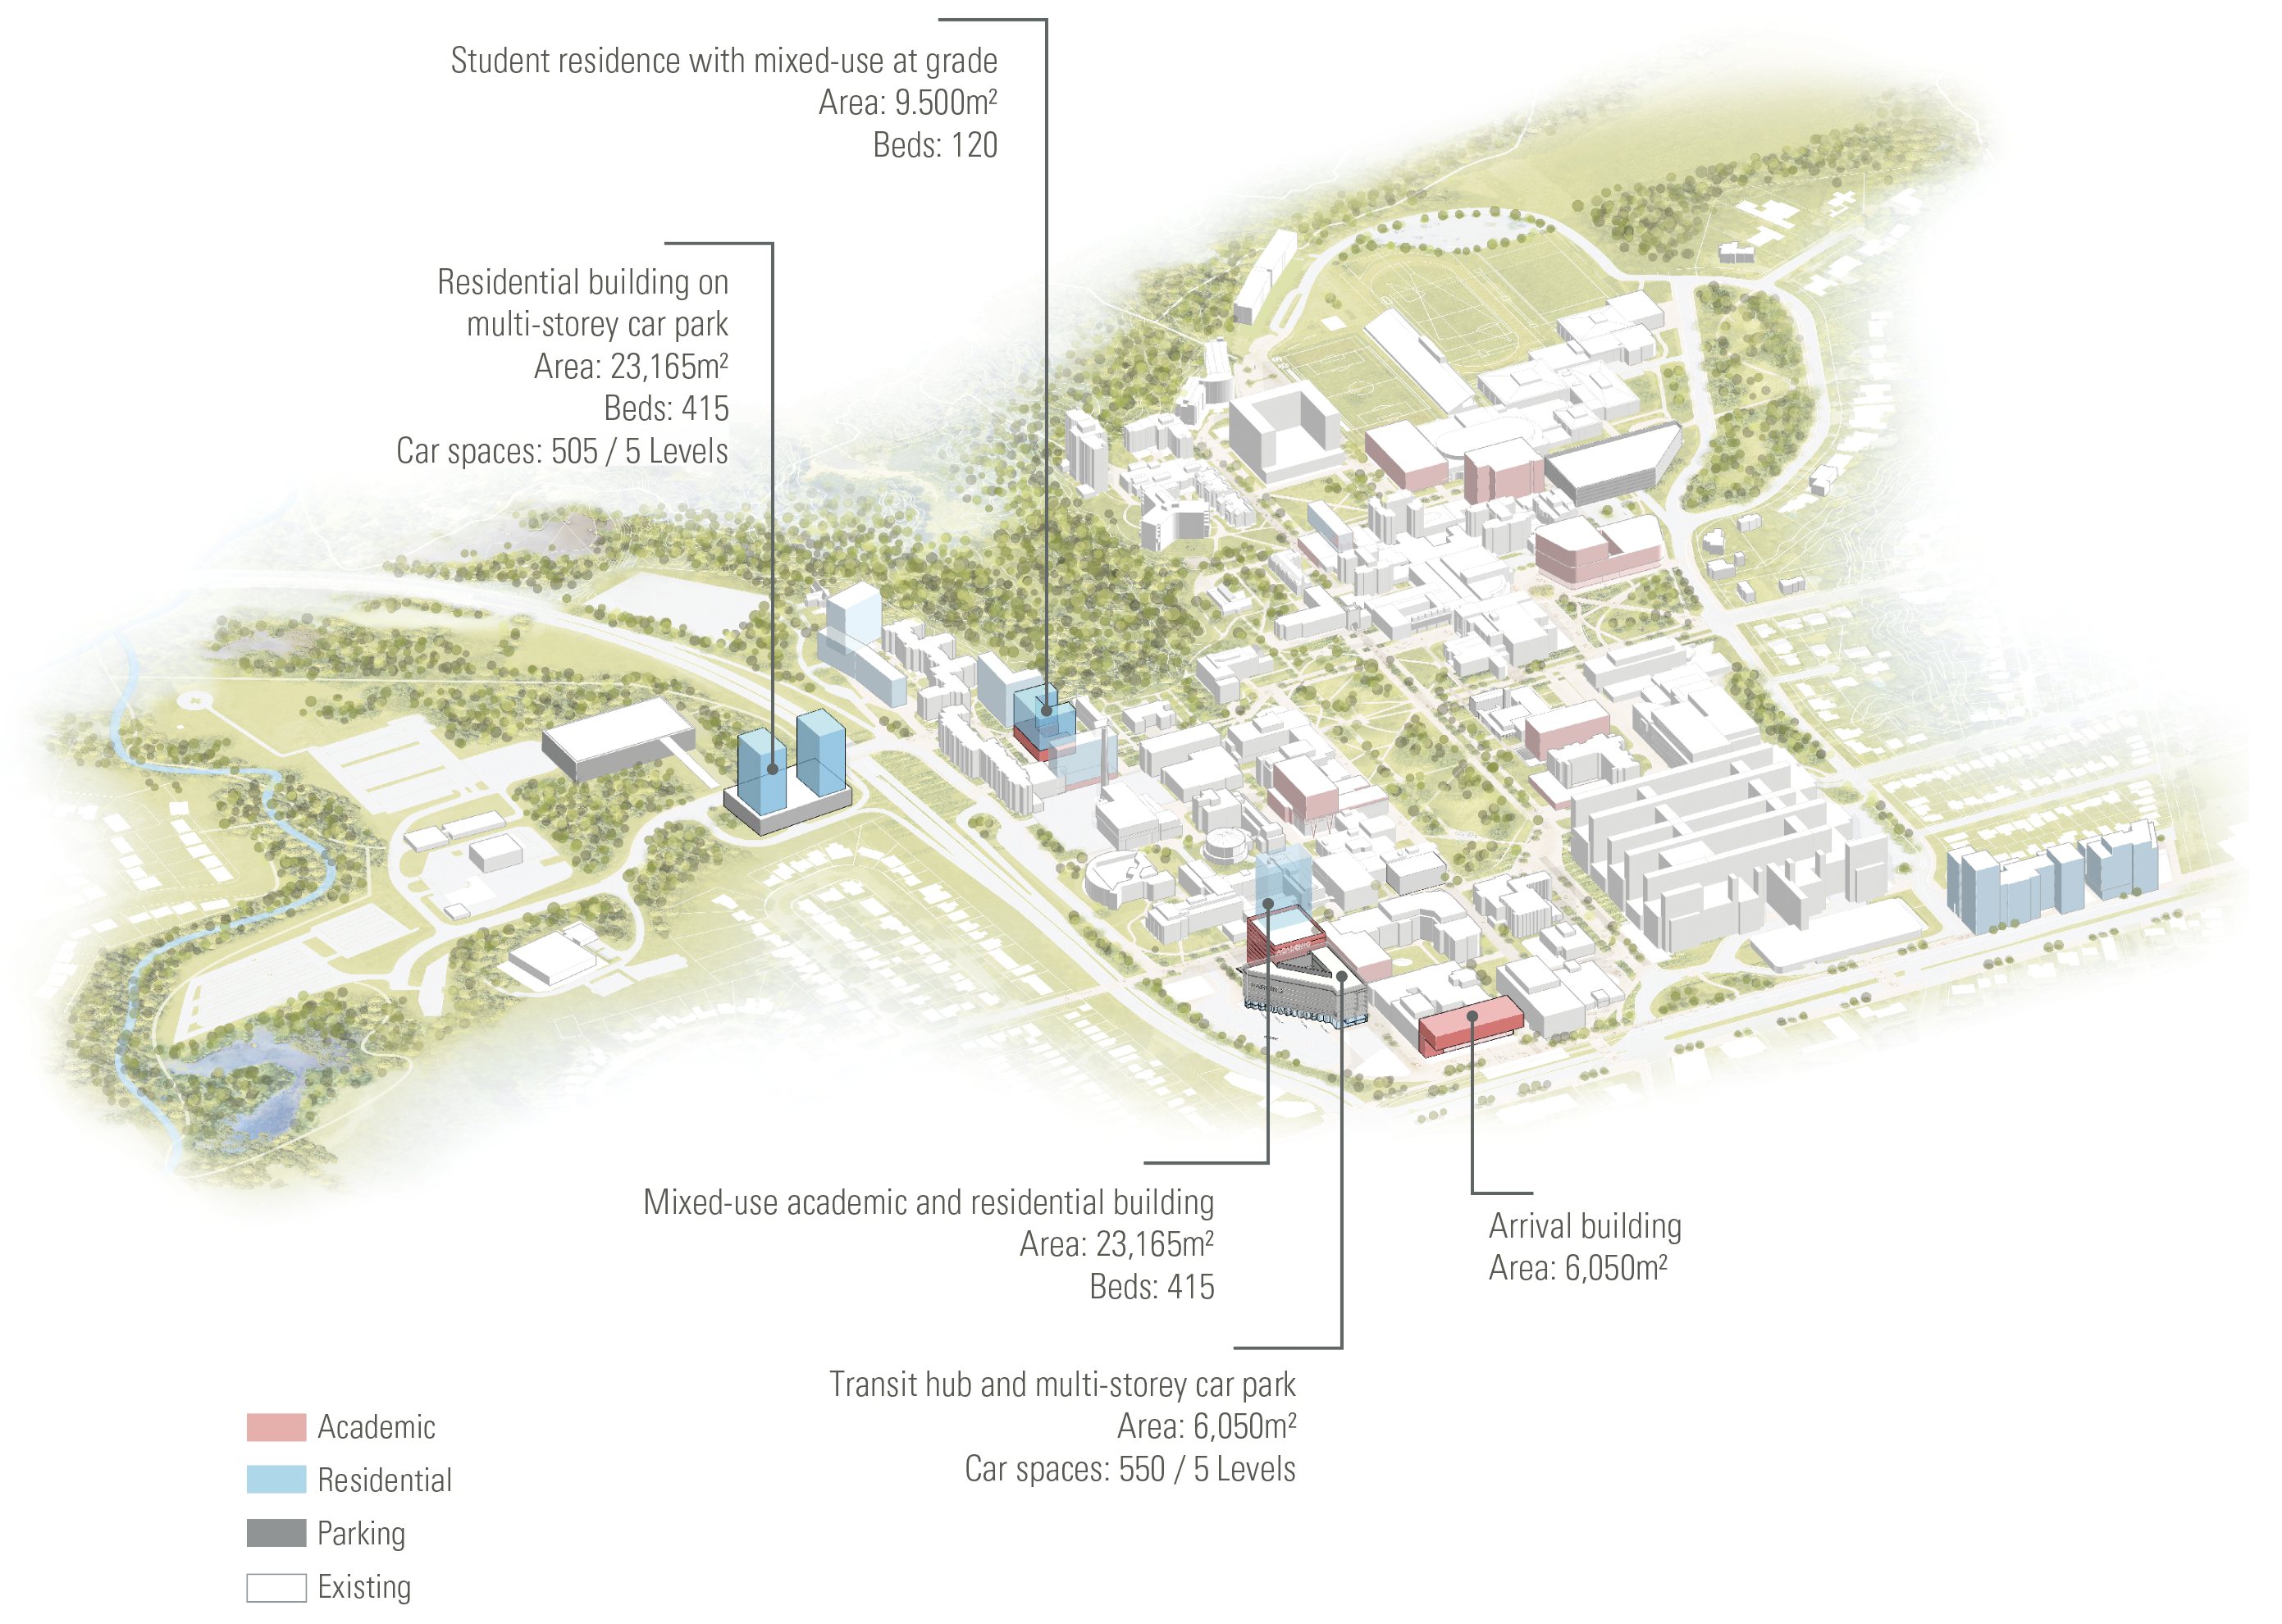 Campus Map illustration depicting structural changes to accommodate low growth in student numbers